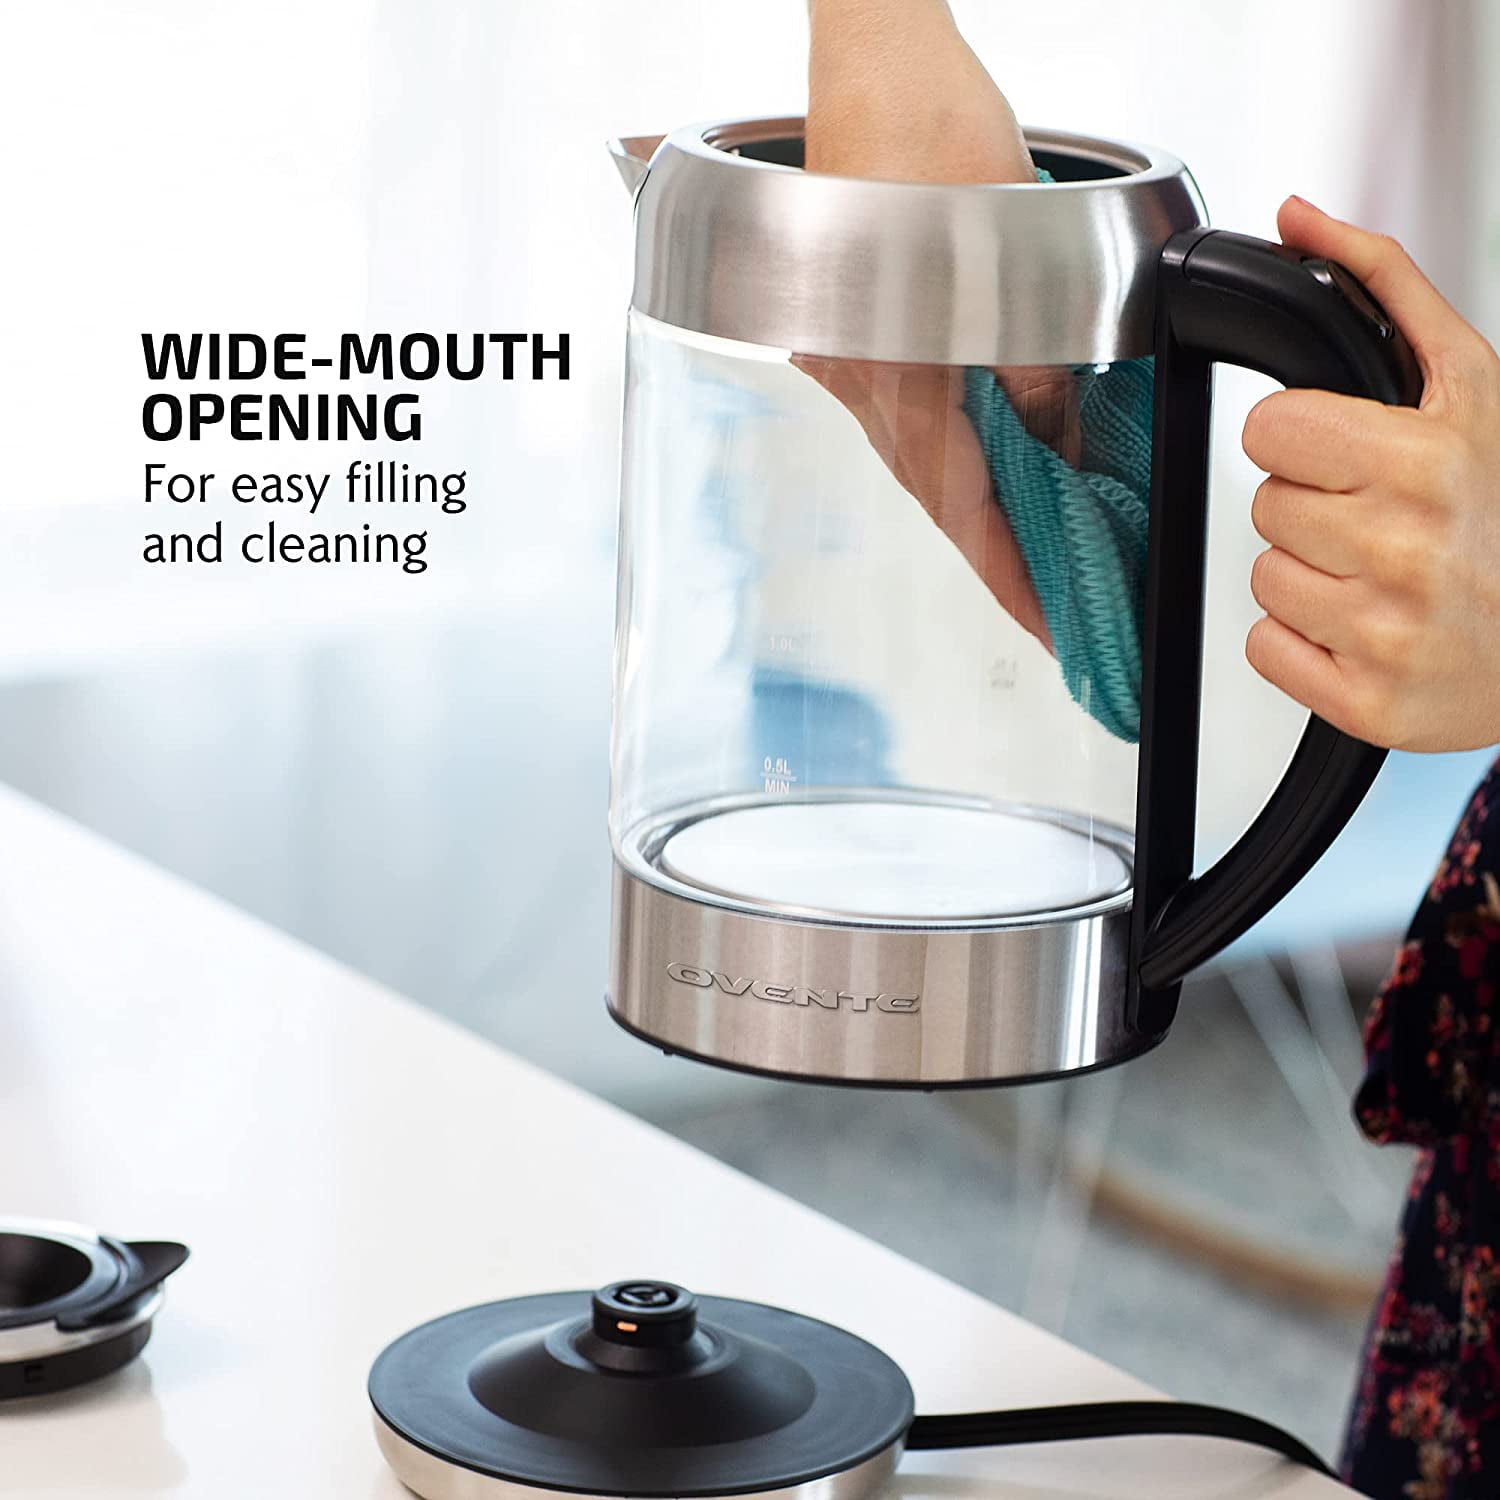 Ovente Electric Glass Hot Water Kettle 1.5 Liter Easy ProntoFill Black KG516B